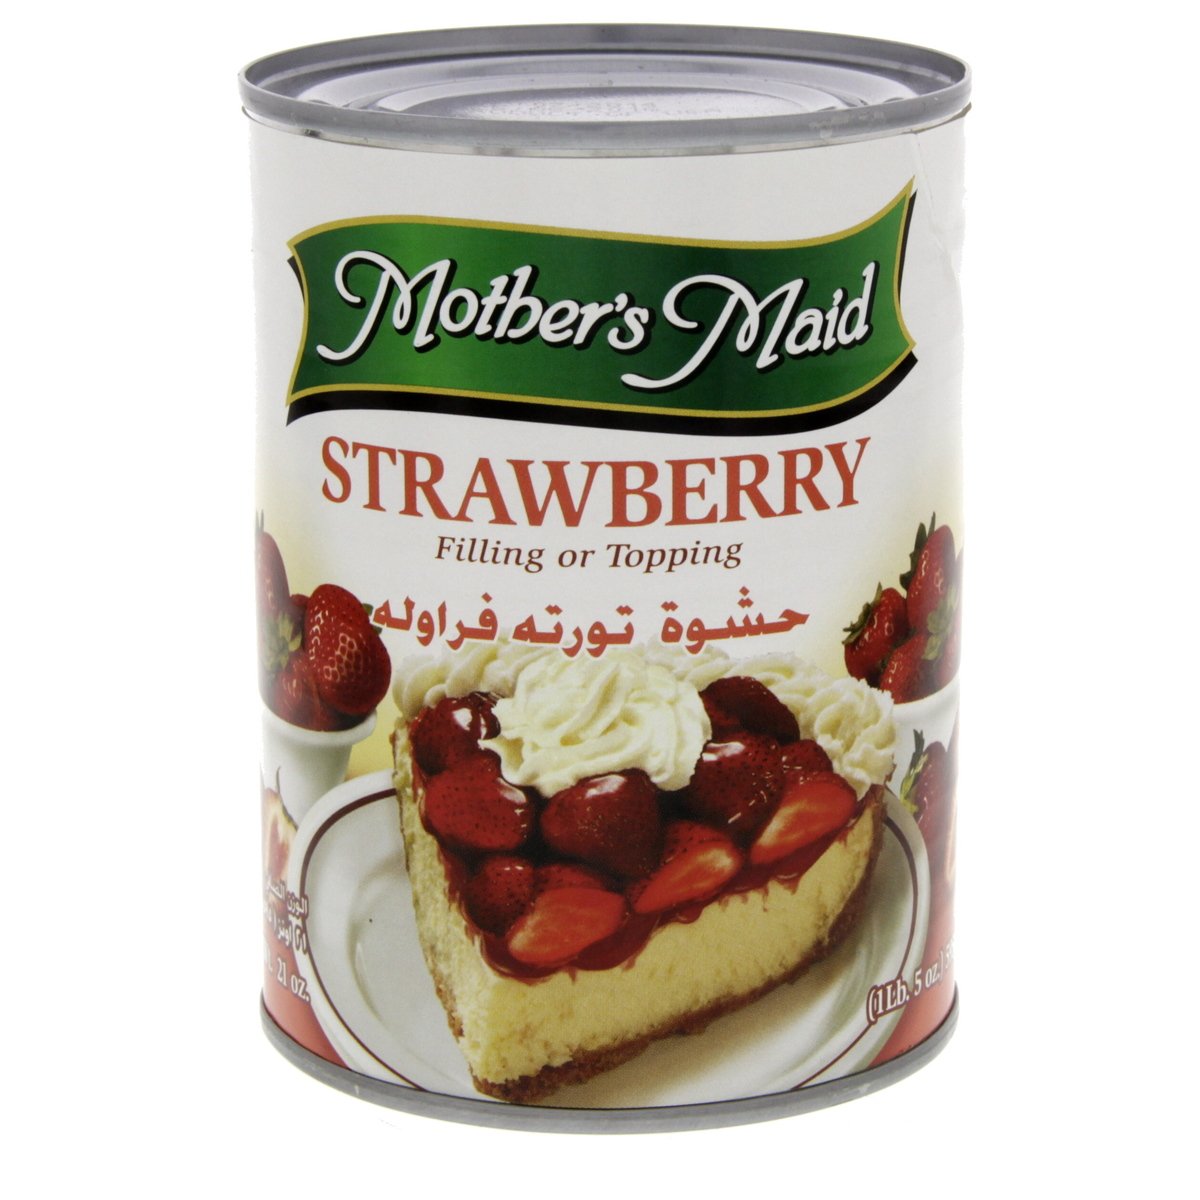 Mother's Maid Strawberry Filling Or Topping 595 g